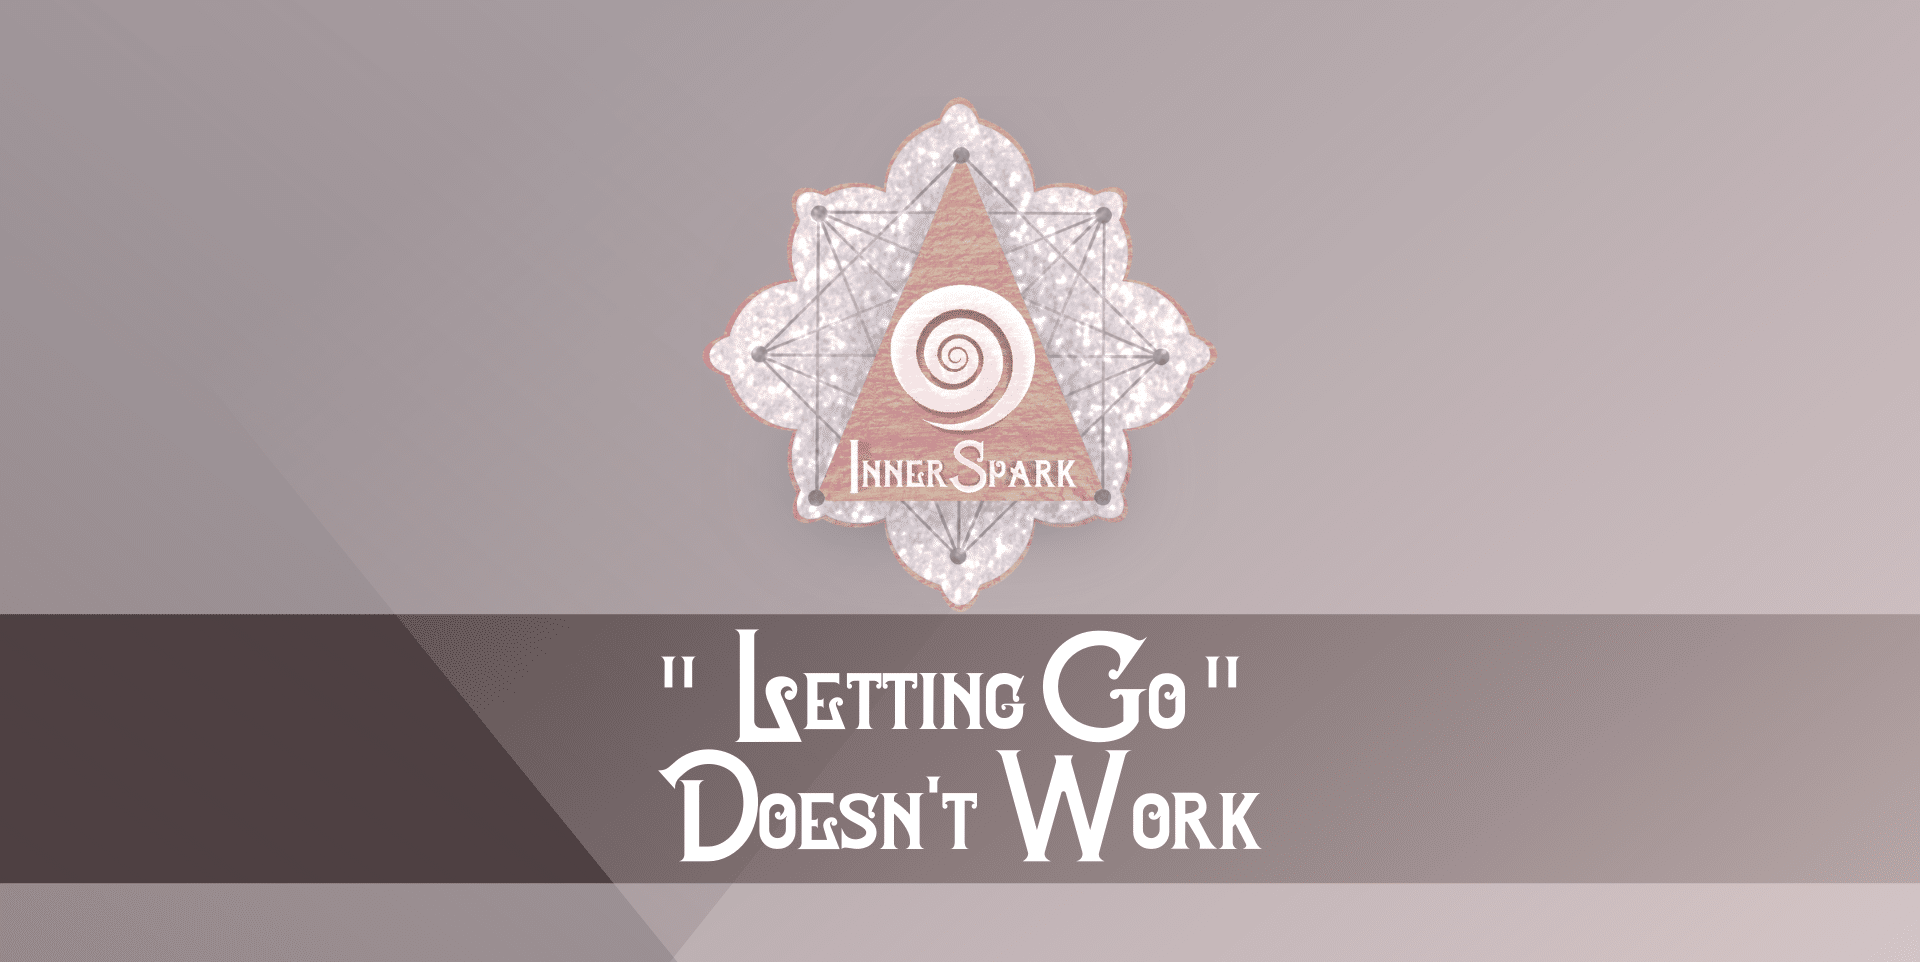 “Letting Go” Doesn’t Work